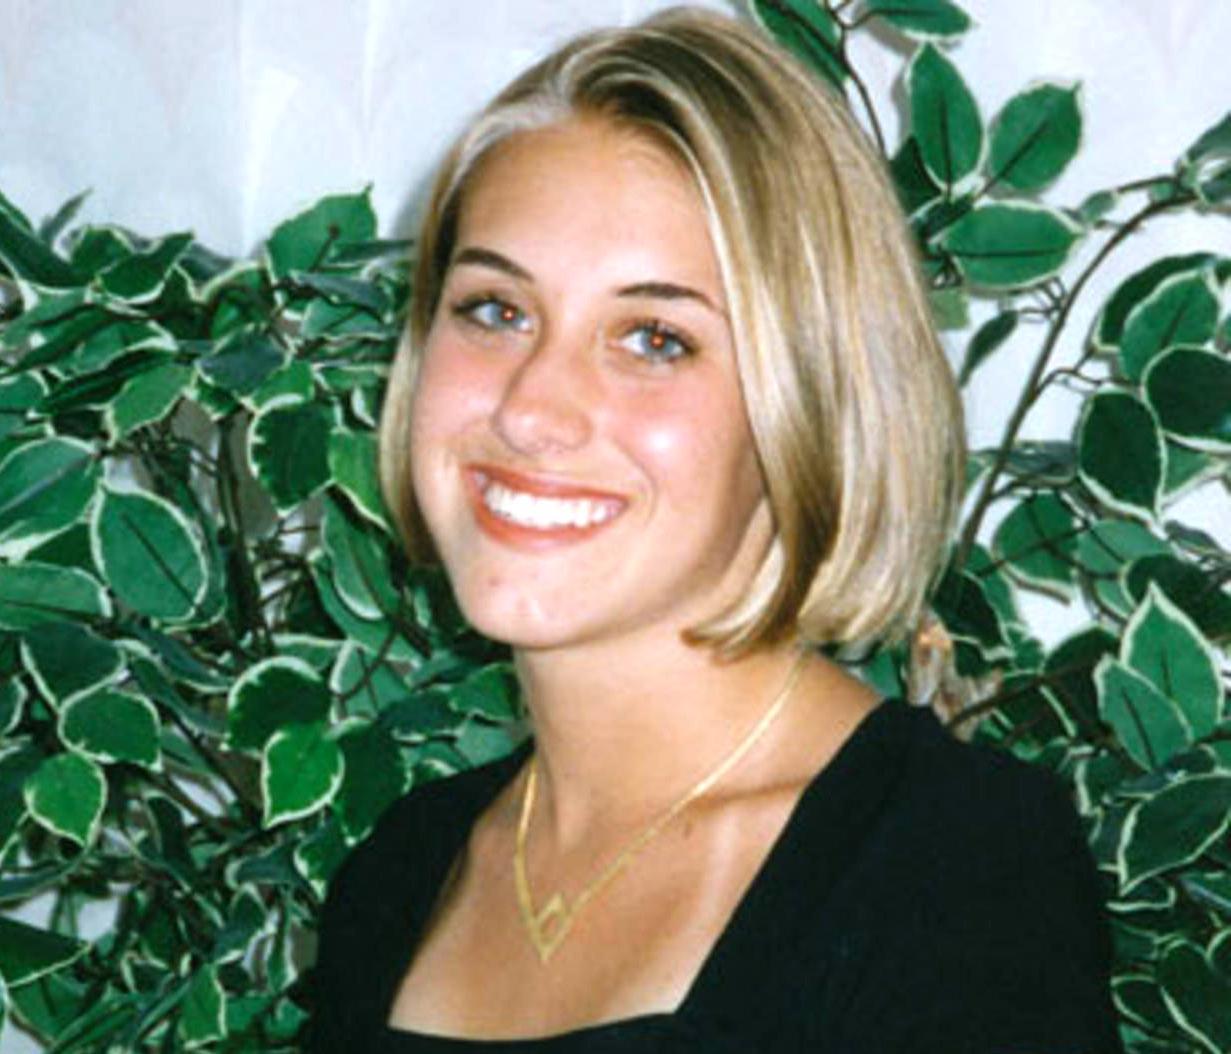 The unsolved disappearance of Jennifer Kesse 2